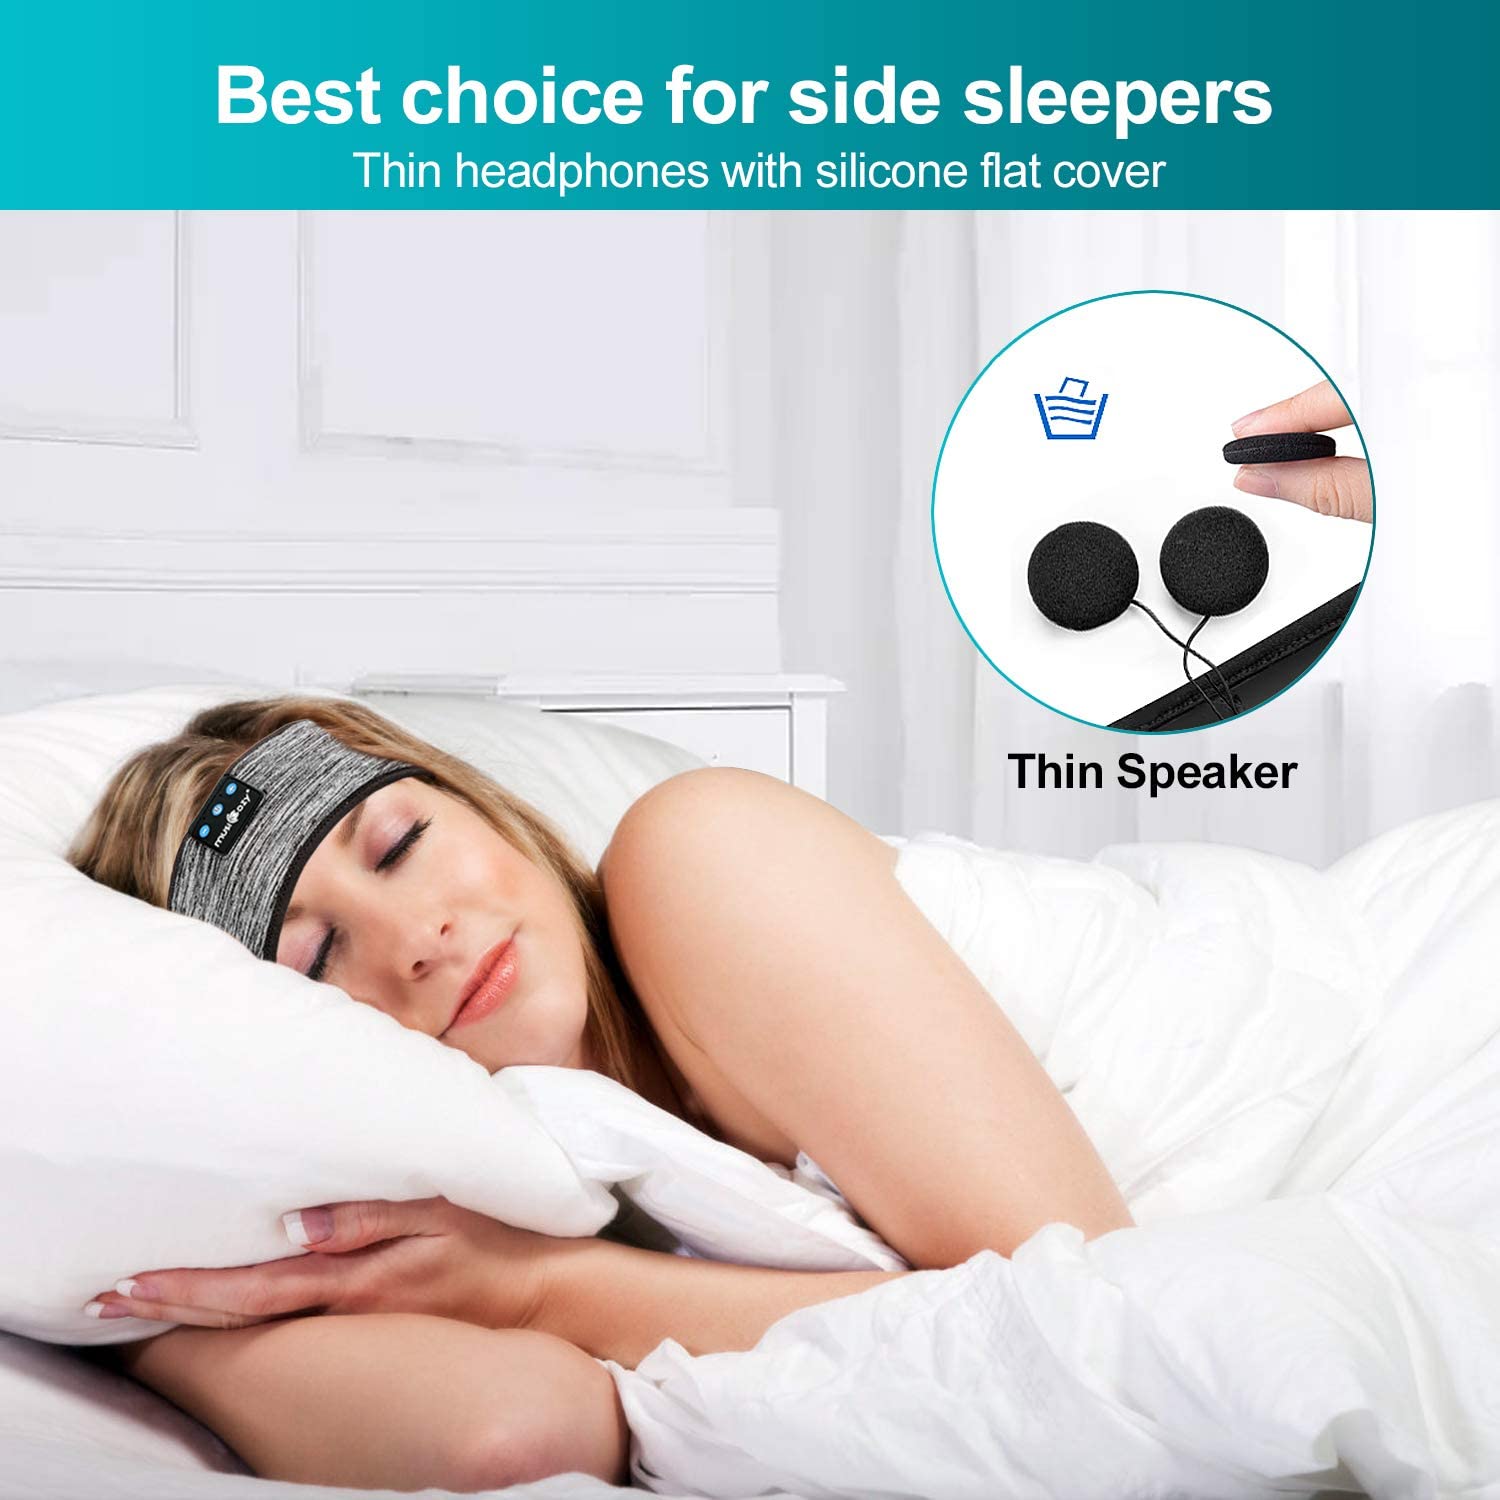 Sleep Headphones Bluetooth Headband Wireless Music Headband Headphones, Sports Sleeping Headband Headphones with Ultra-Thin HD Stereo Speakers Perfect for Side Sleepers Insomnia Workout, Jogging gery